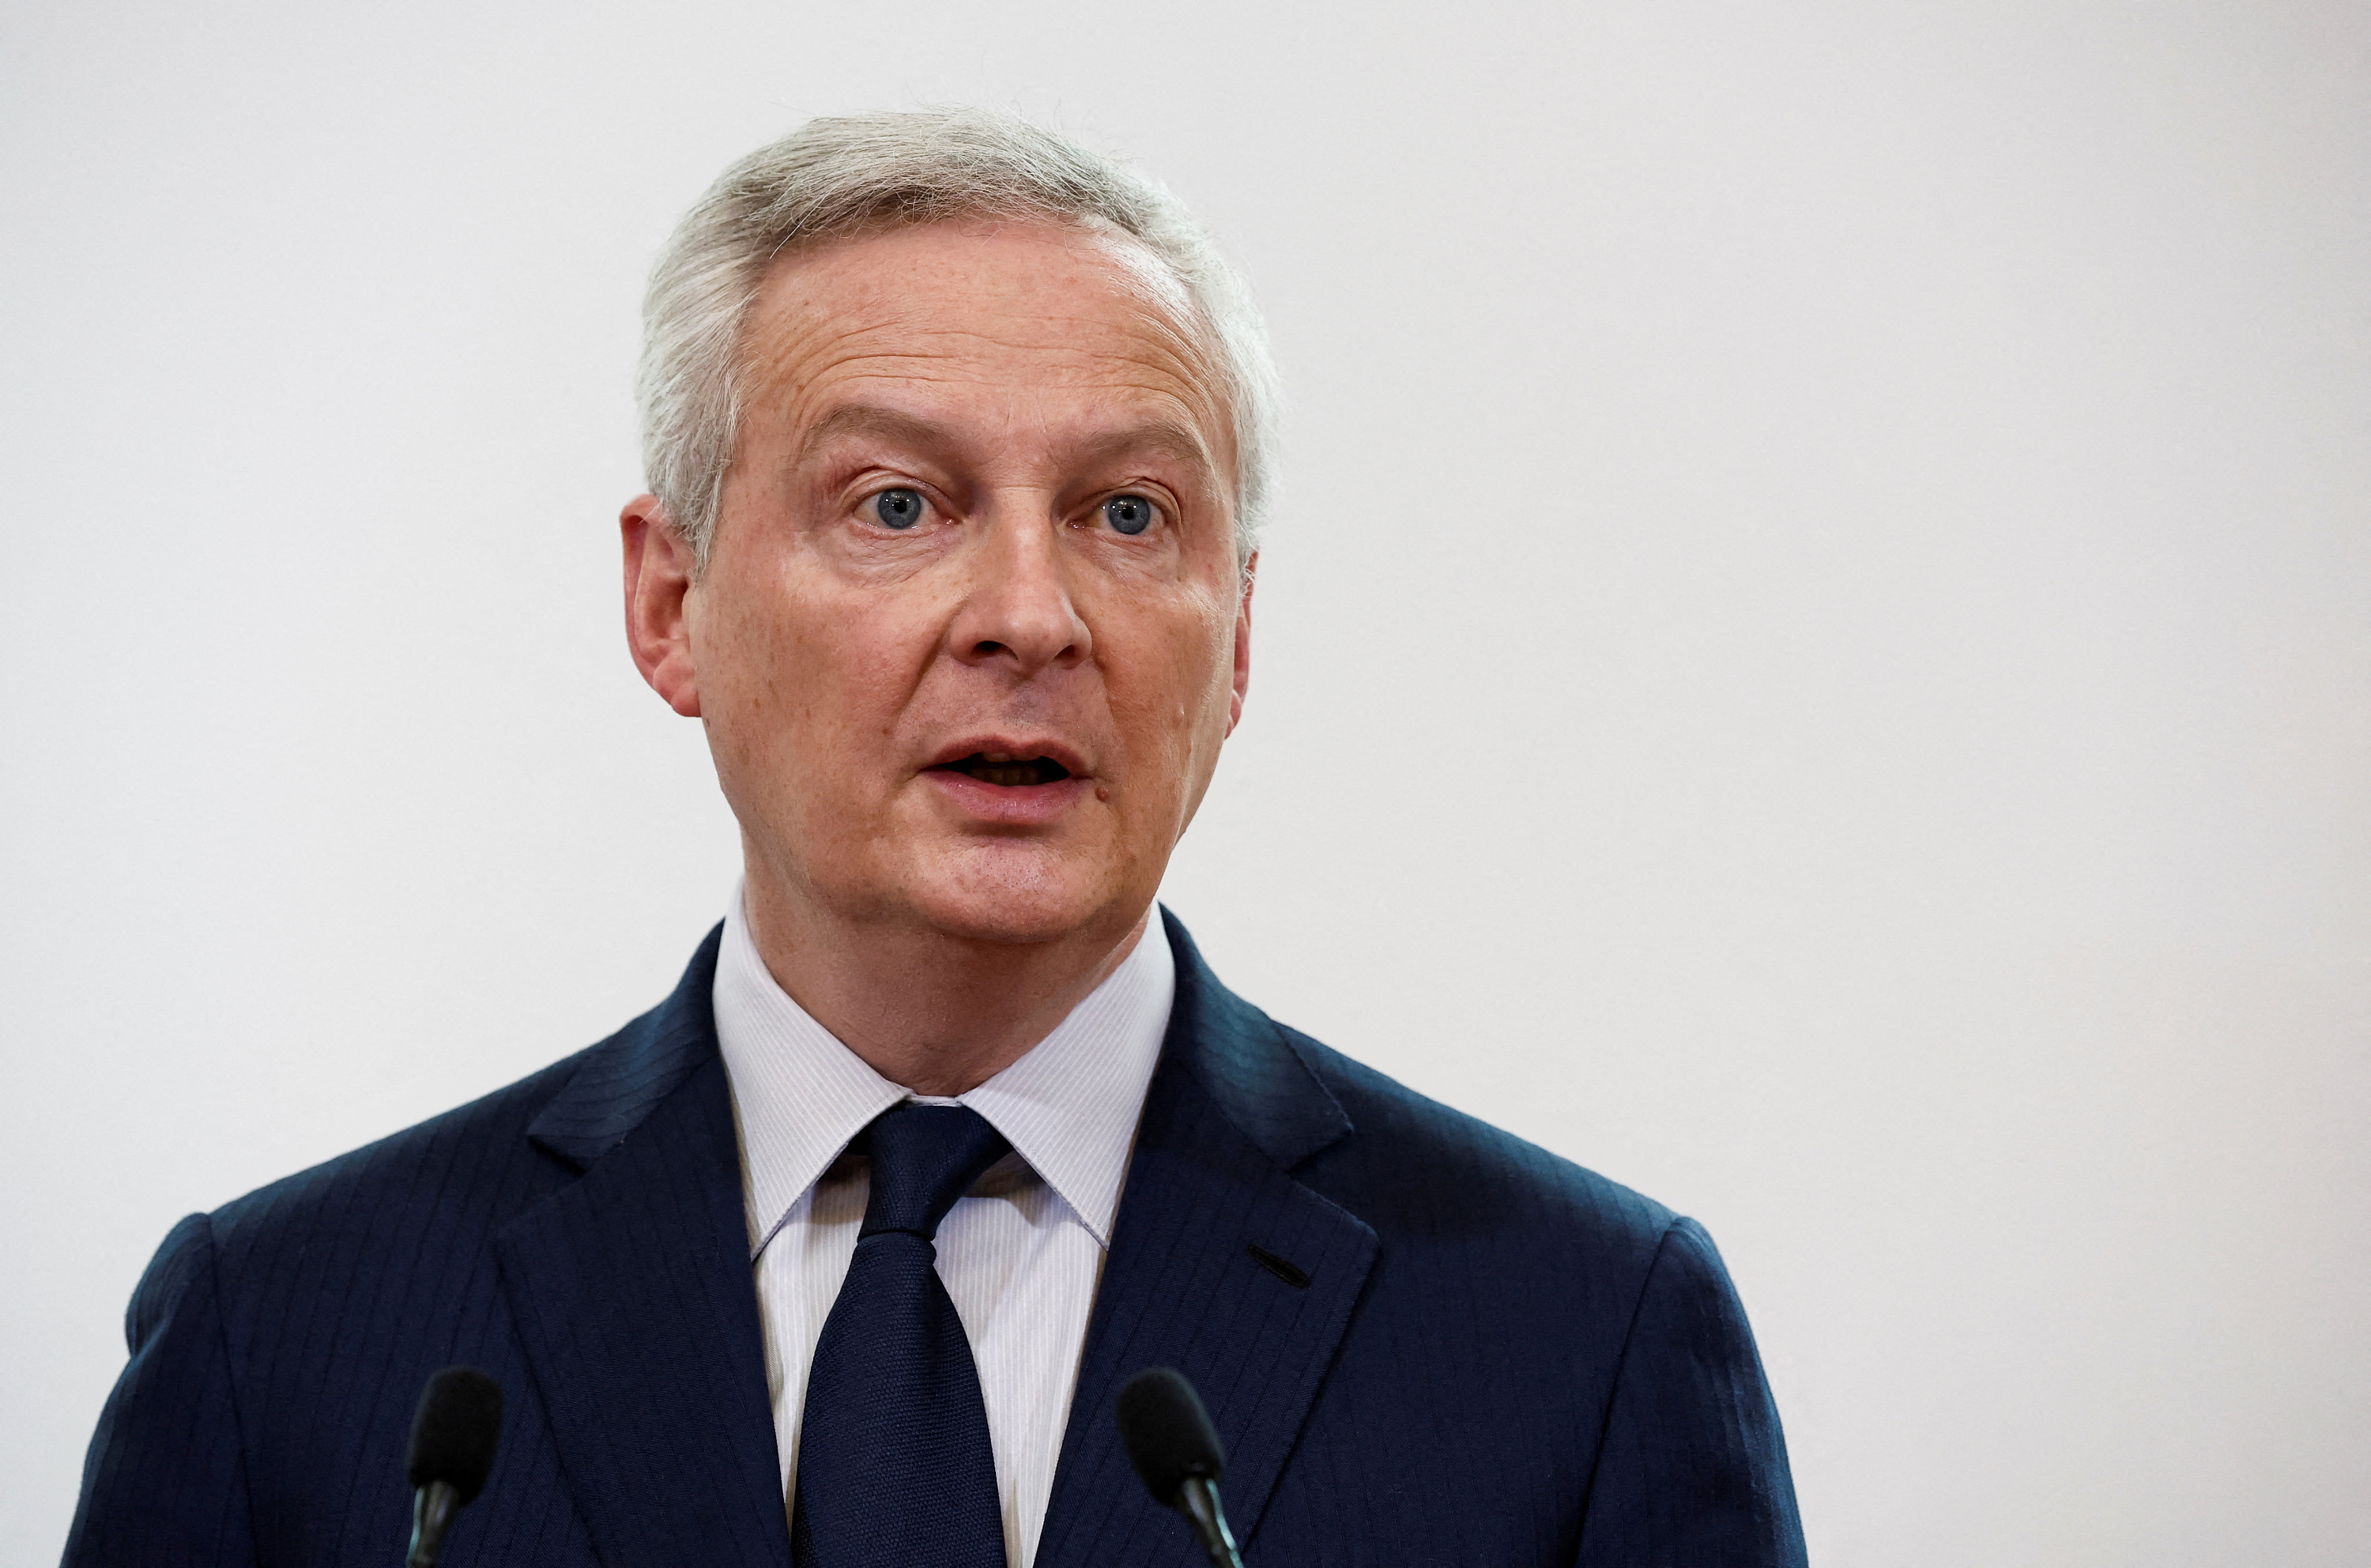 “Taxes will not increase, this is not the right solution,” insists Bruno Le Maire